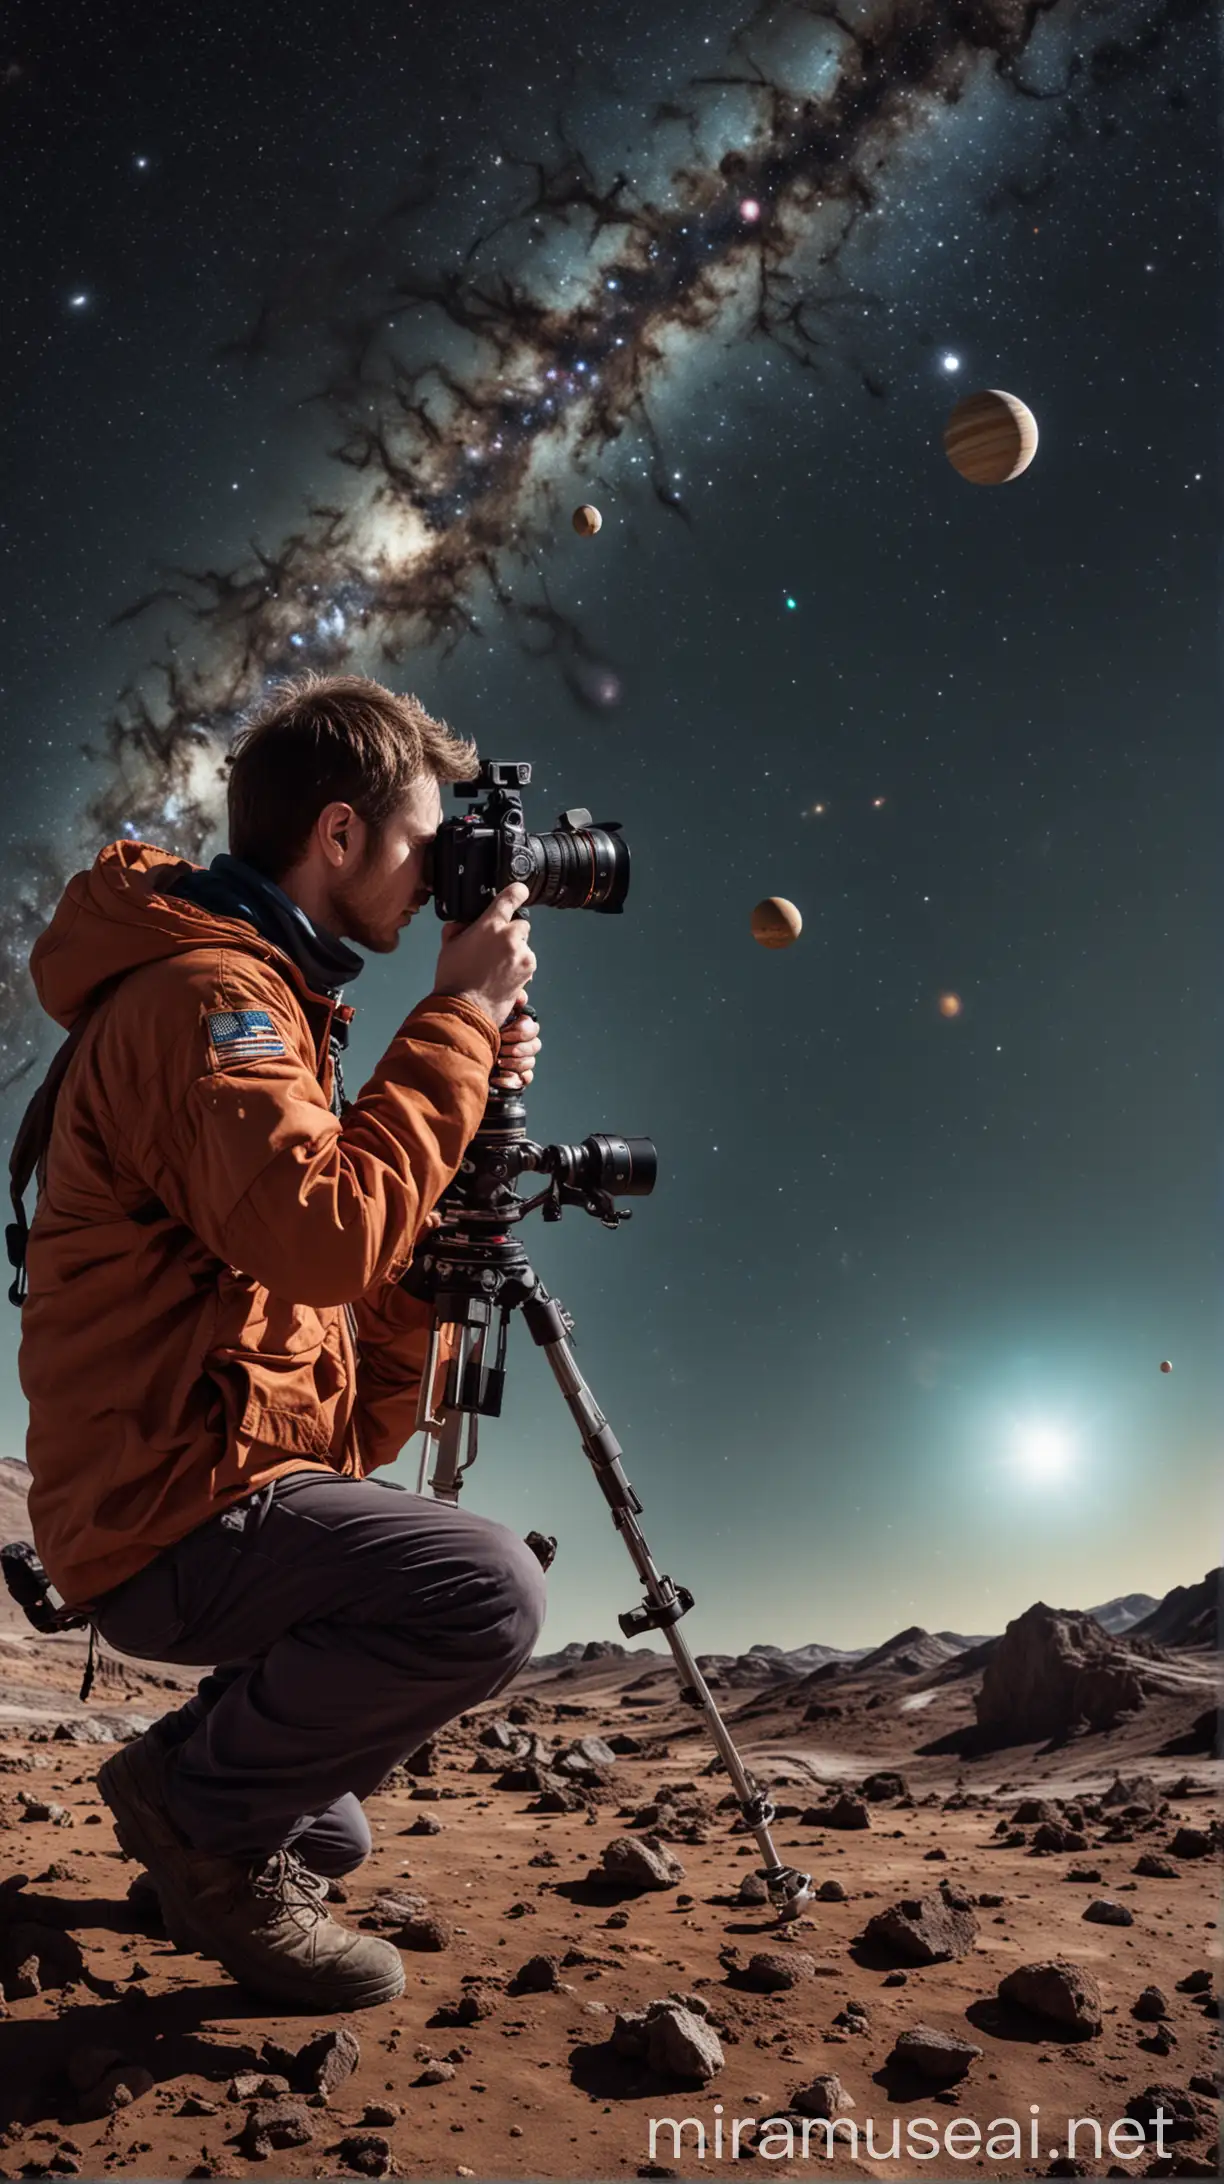 Space Photographer Capturing Planets with a HighTech Camera